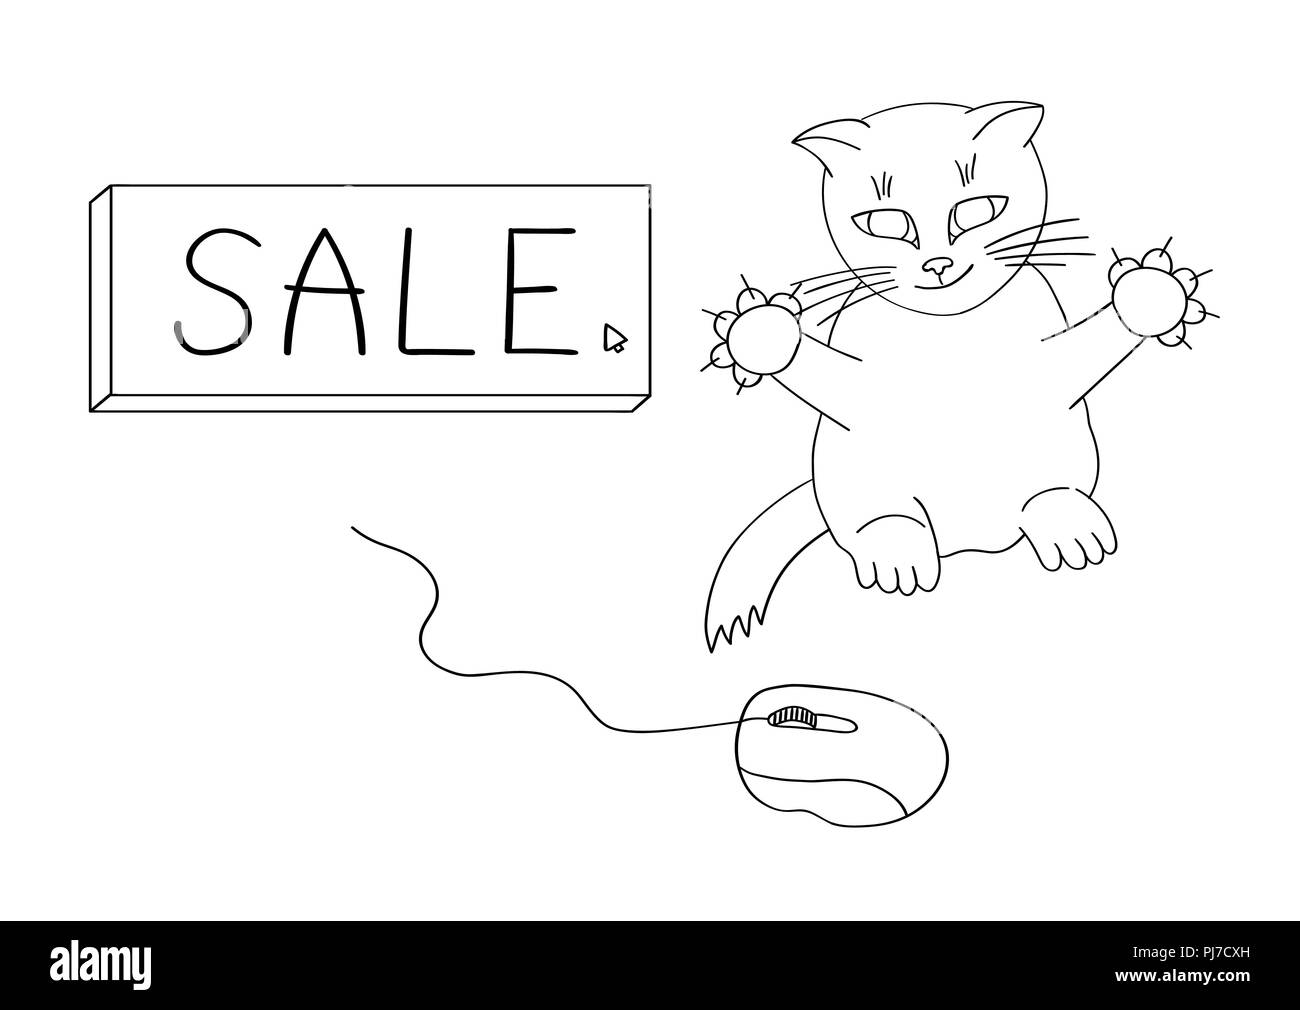 The cat hunts for a computer mouse to get on sales. Humor Stock Vector